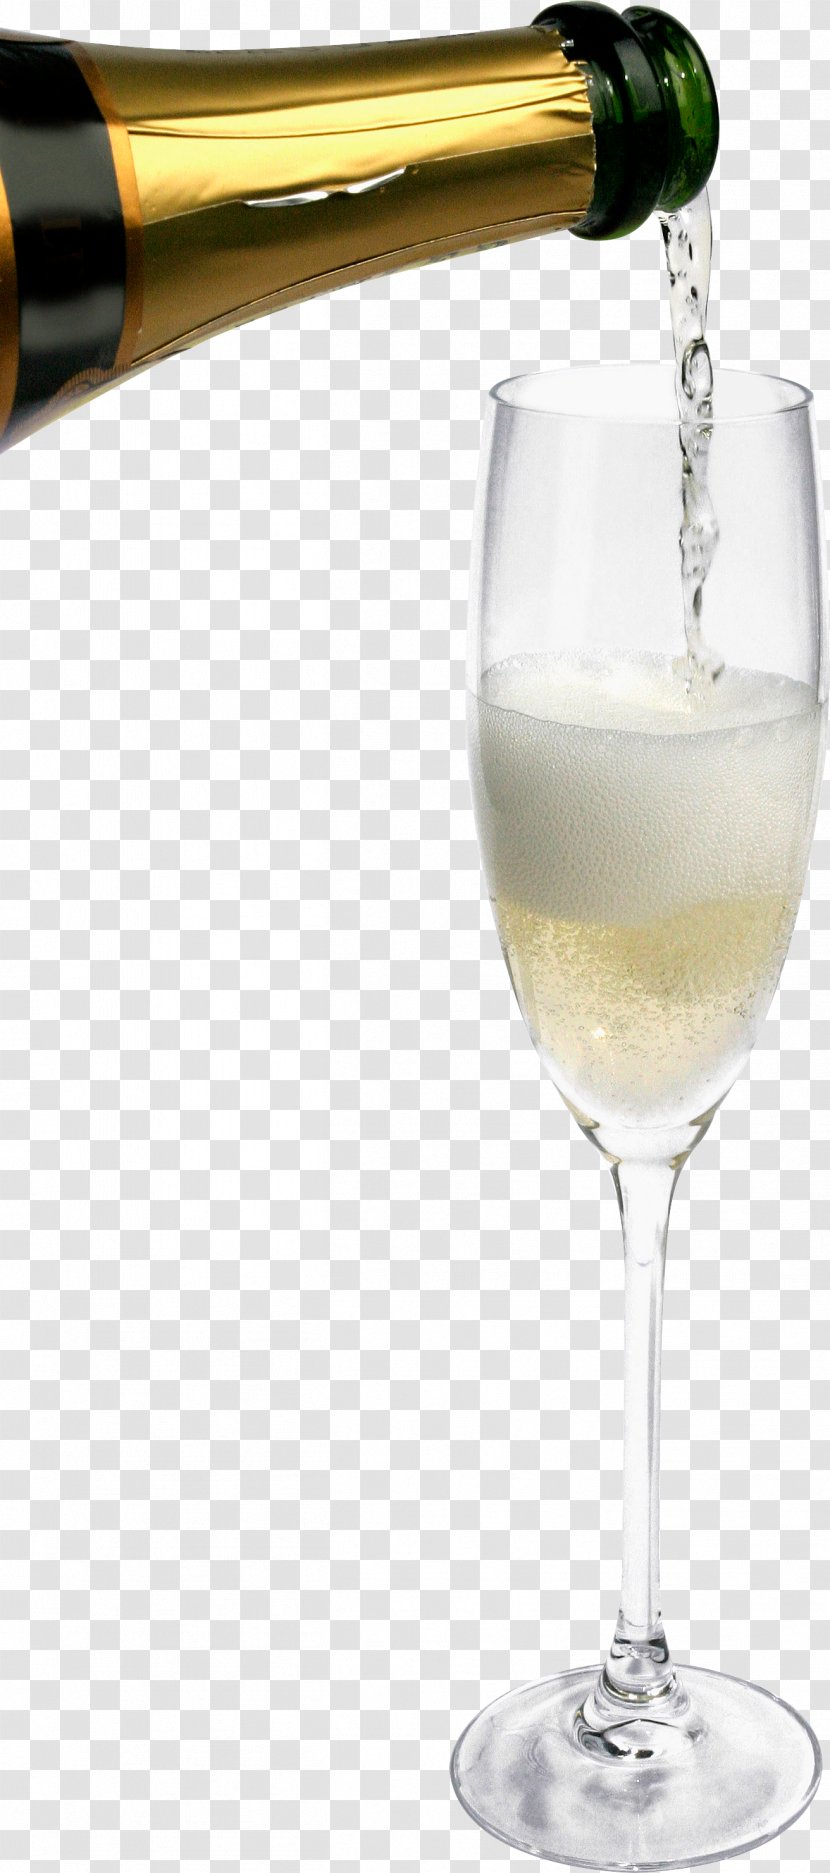 Champagne Glass GIF Image Drink - Stemware Transparent PNG